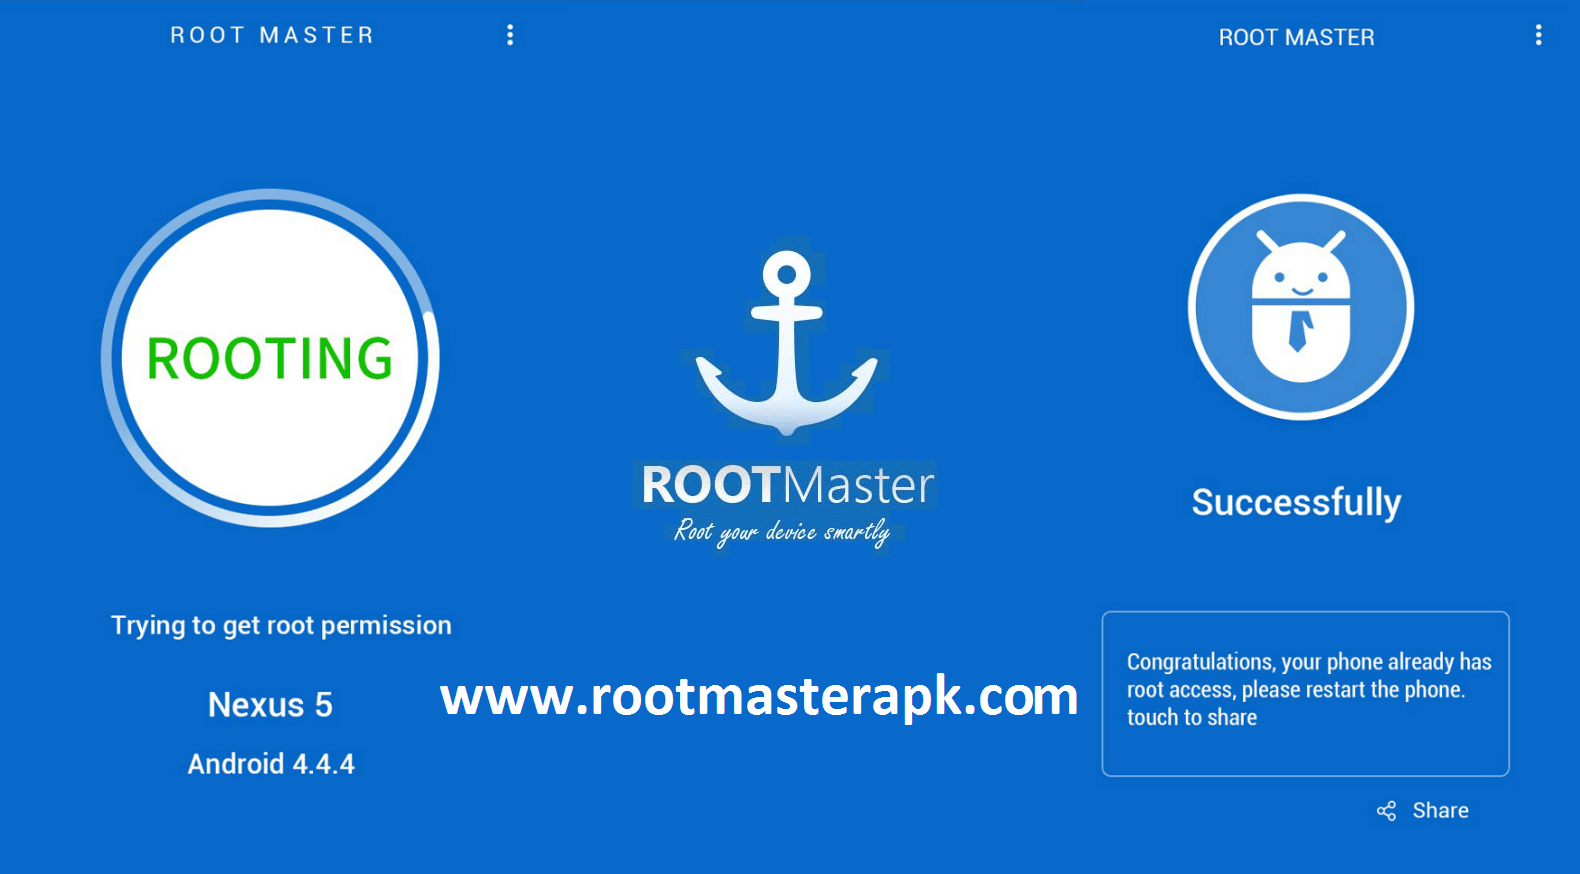 Download Root Master Apk For Android English Chinese